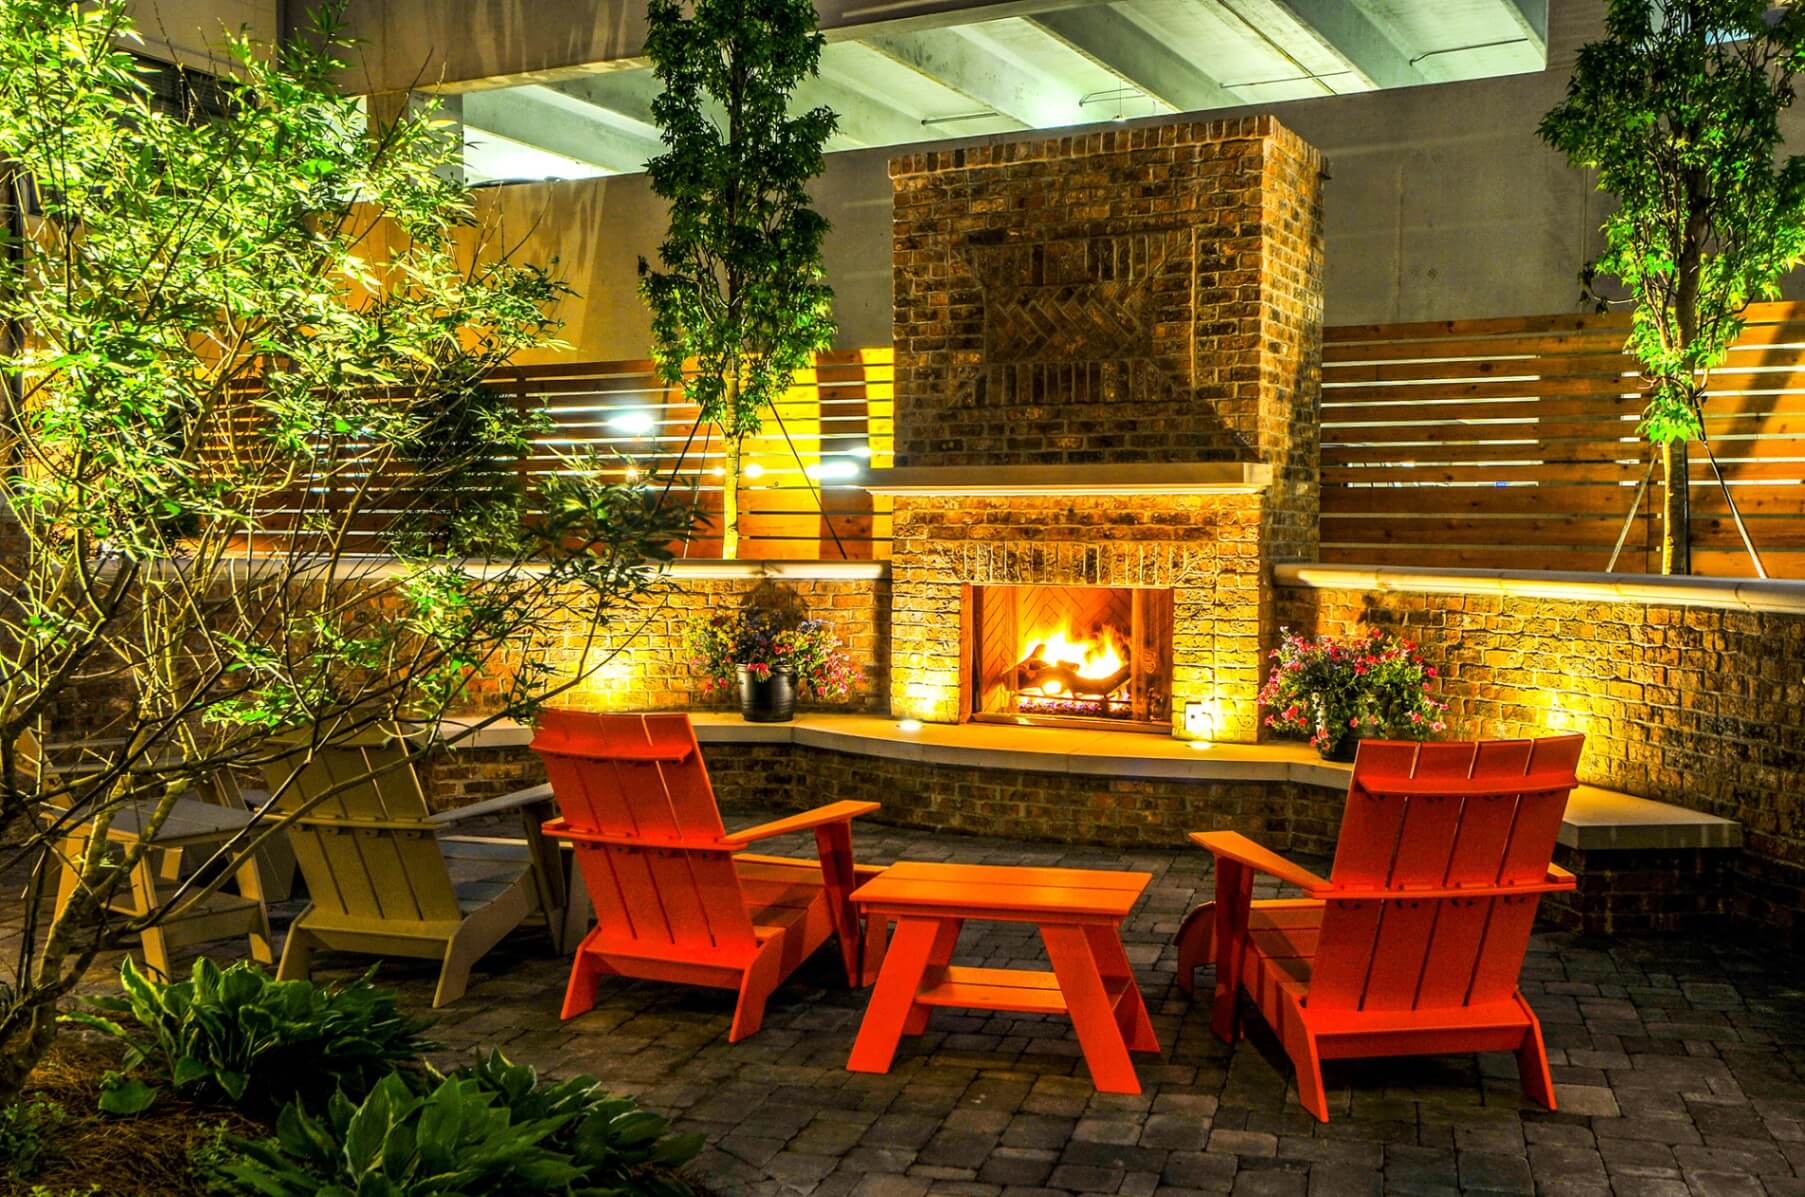 Out door fire place area with chairs and tables